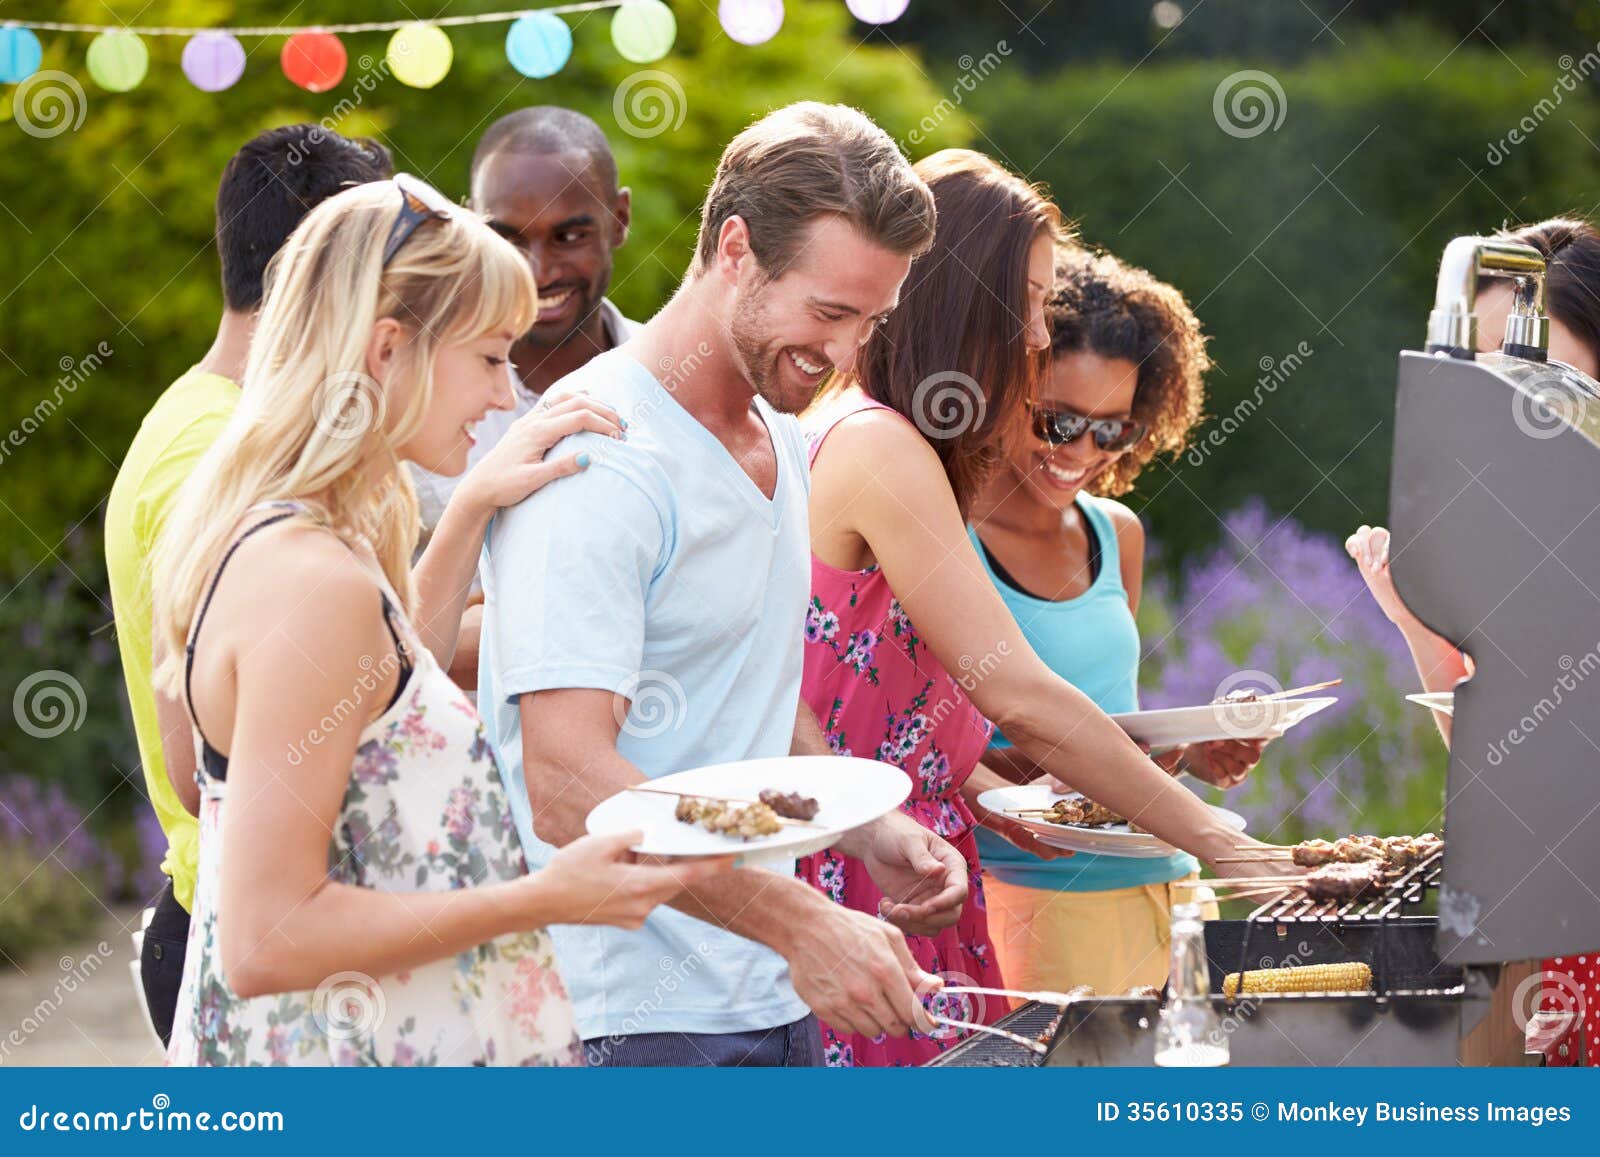 group of friends having outdoor barbeque at home